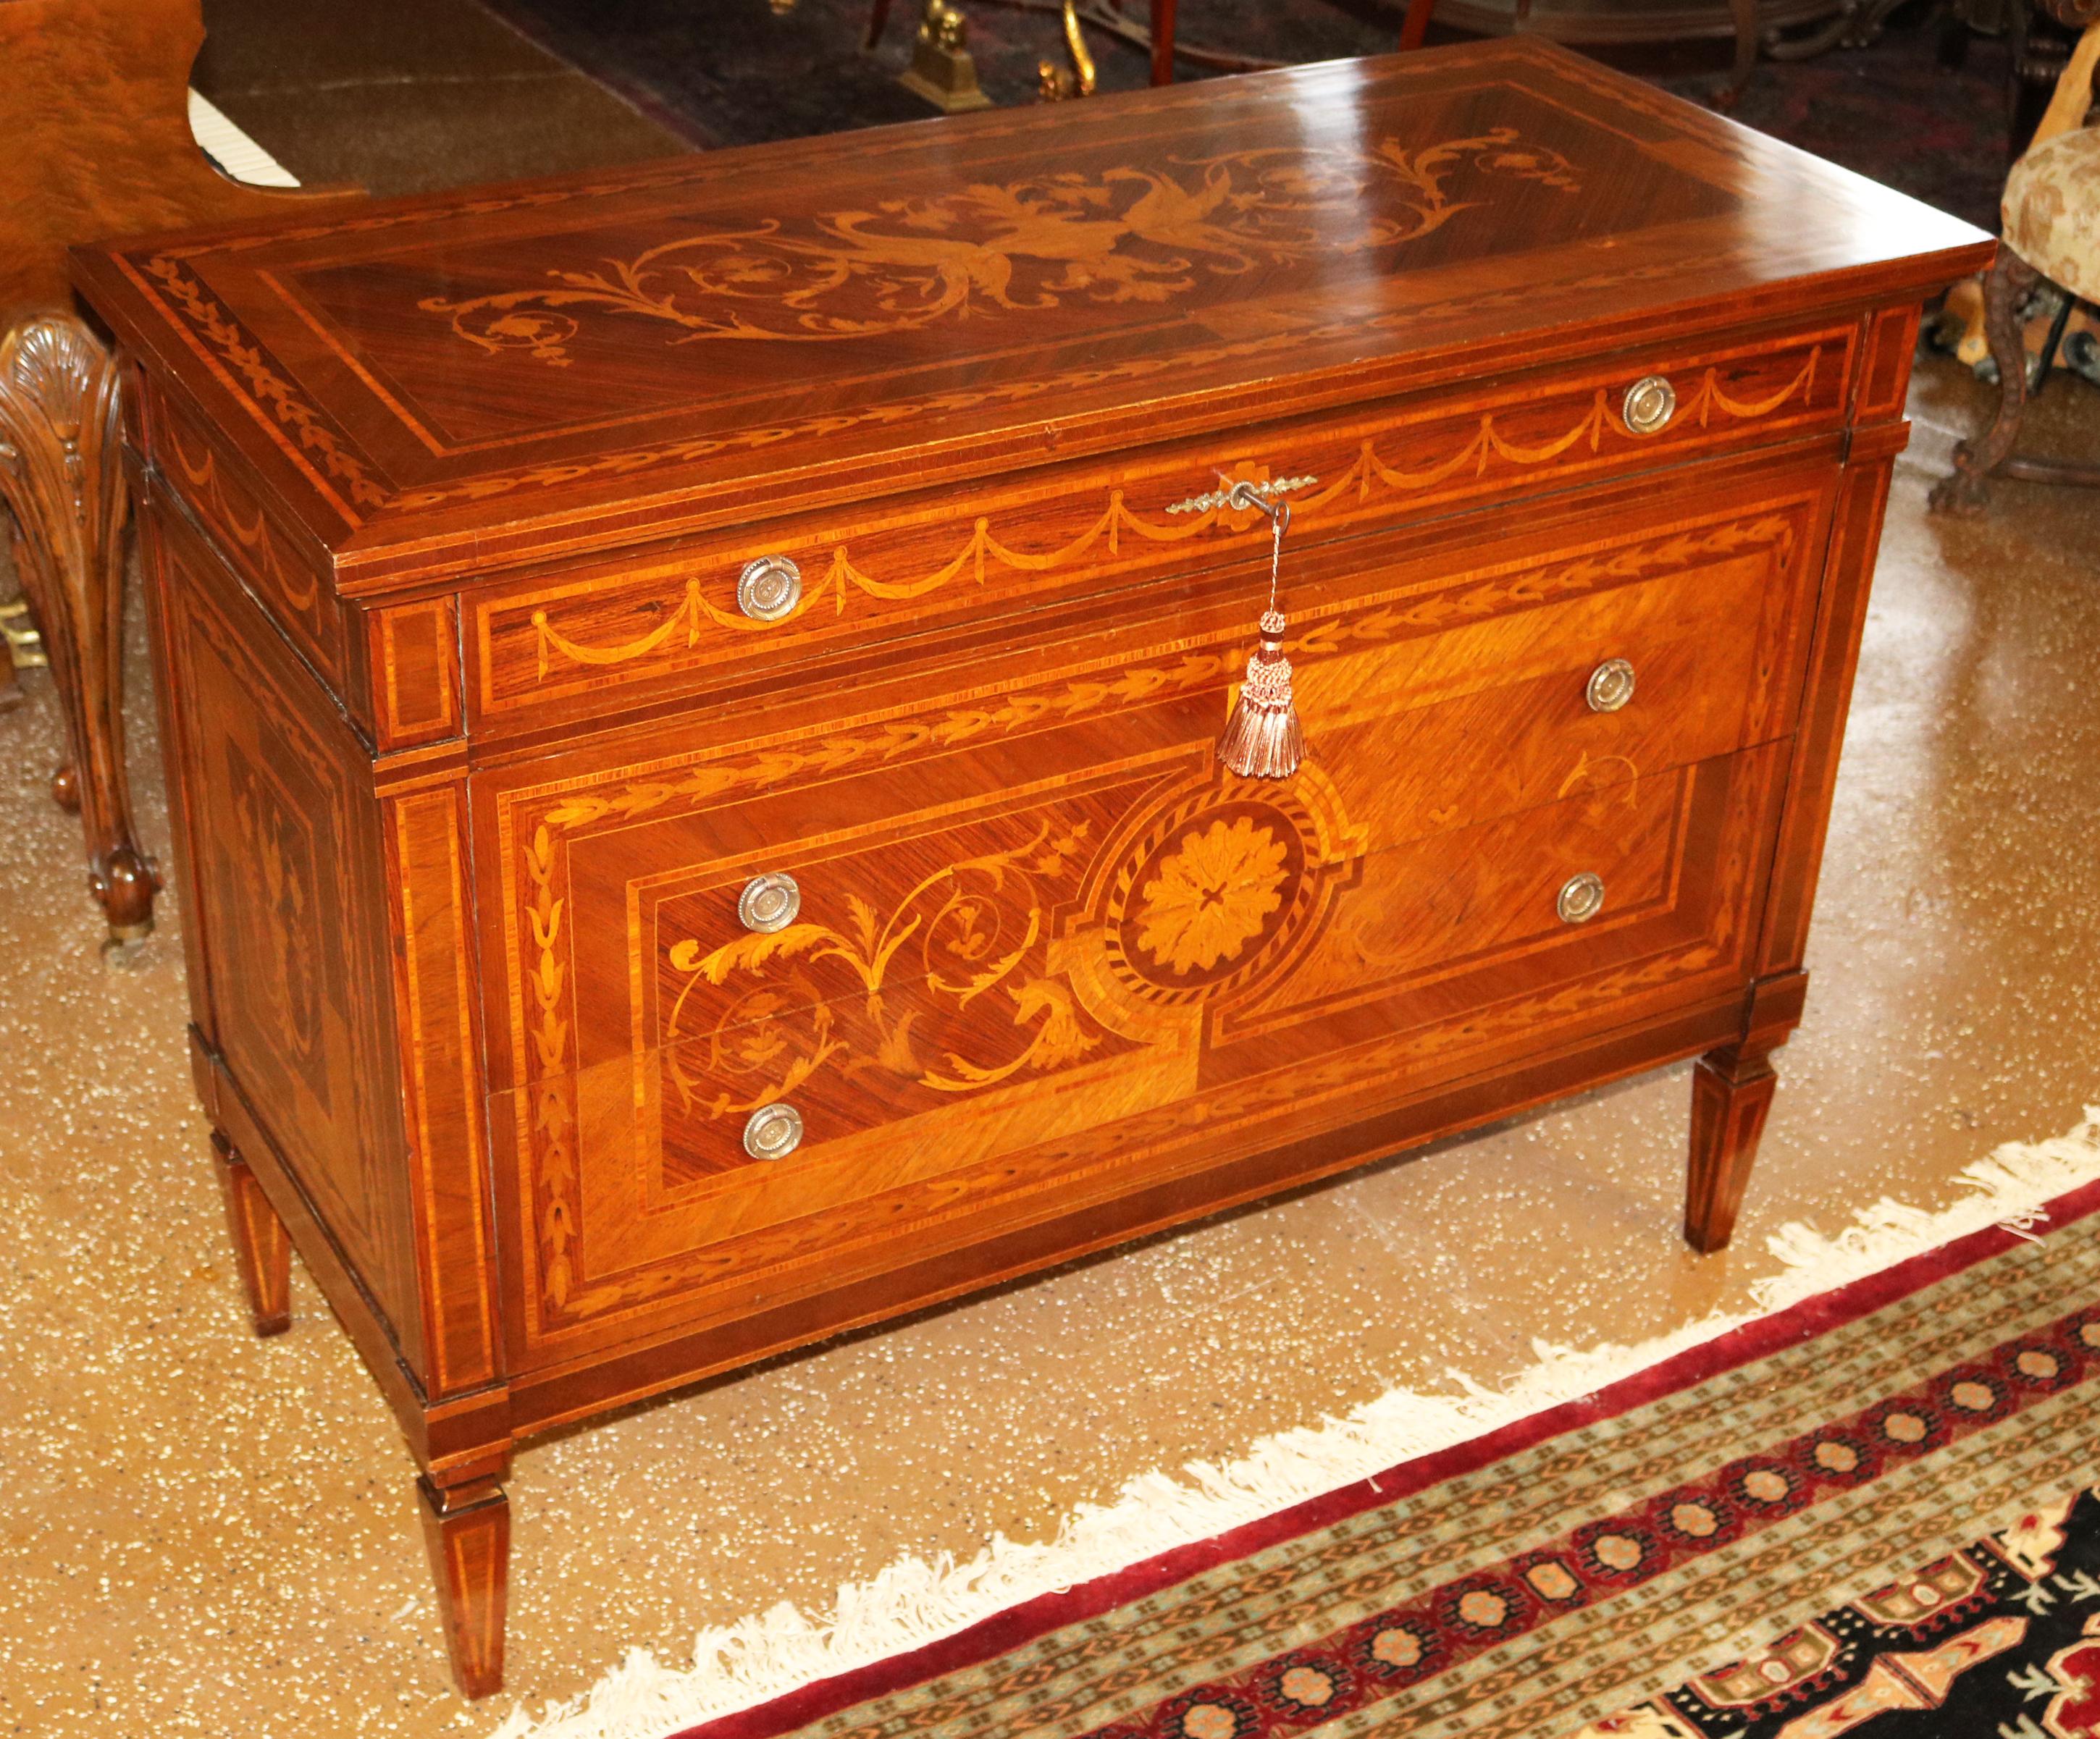 Italian Inlaid Rosewood Commode Dresser Chest of Drawers In Good Condition For Sale In Long Branch, NJ